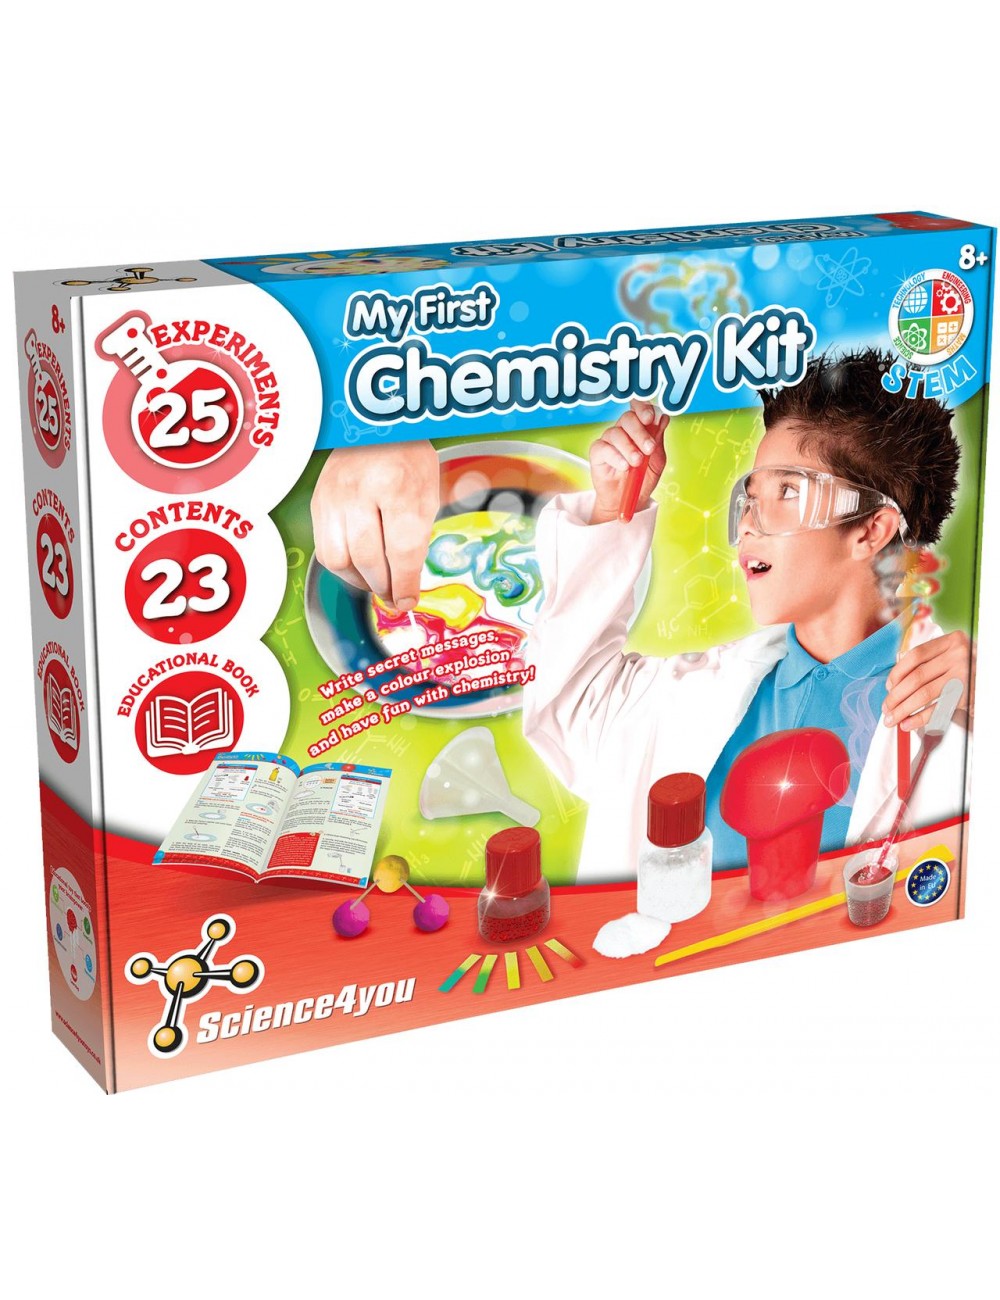 My First Chemistry Kit Game